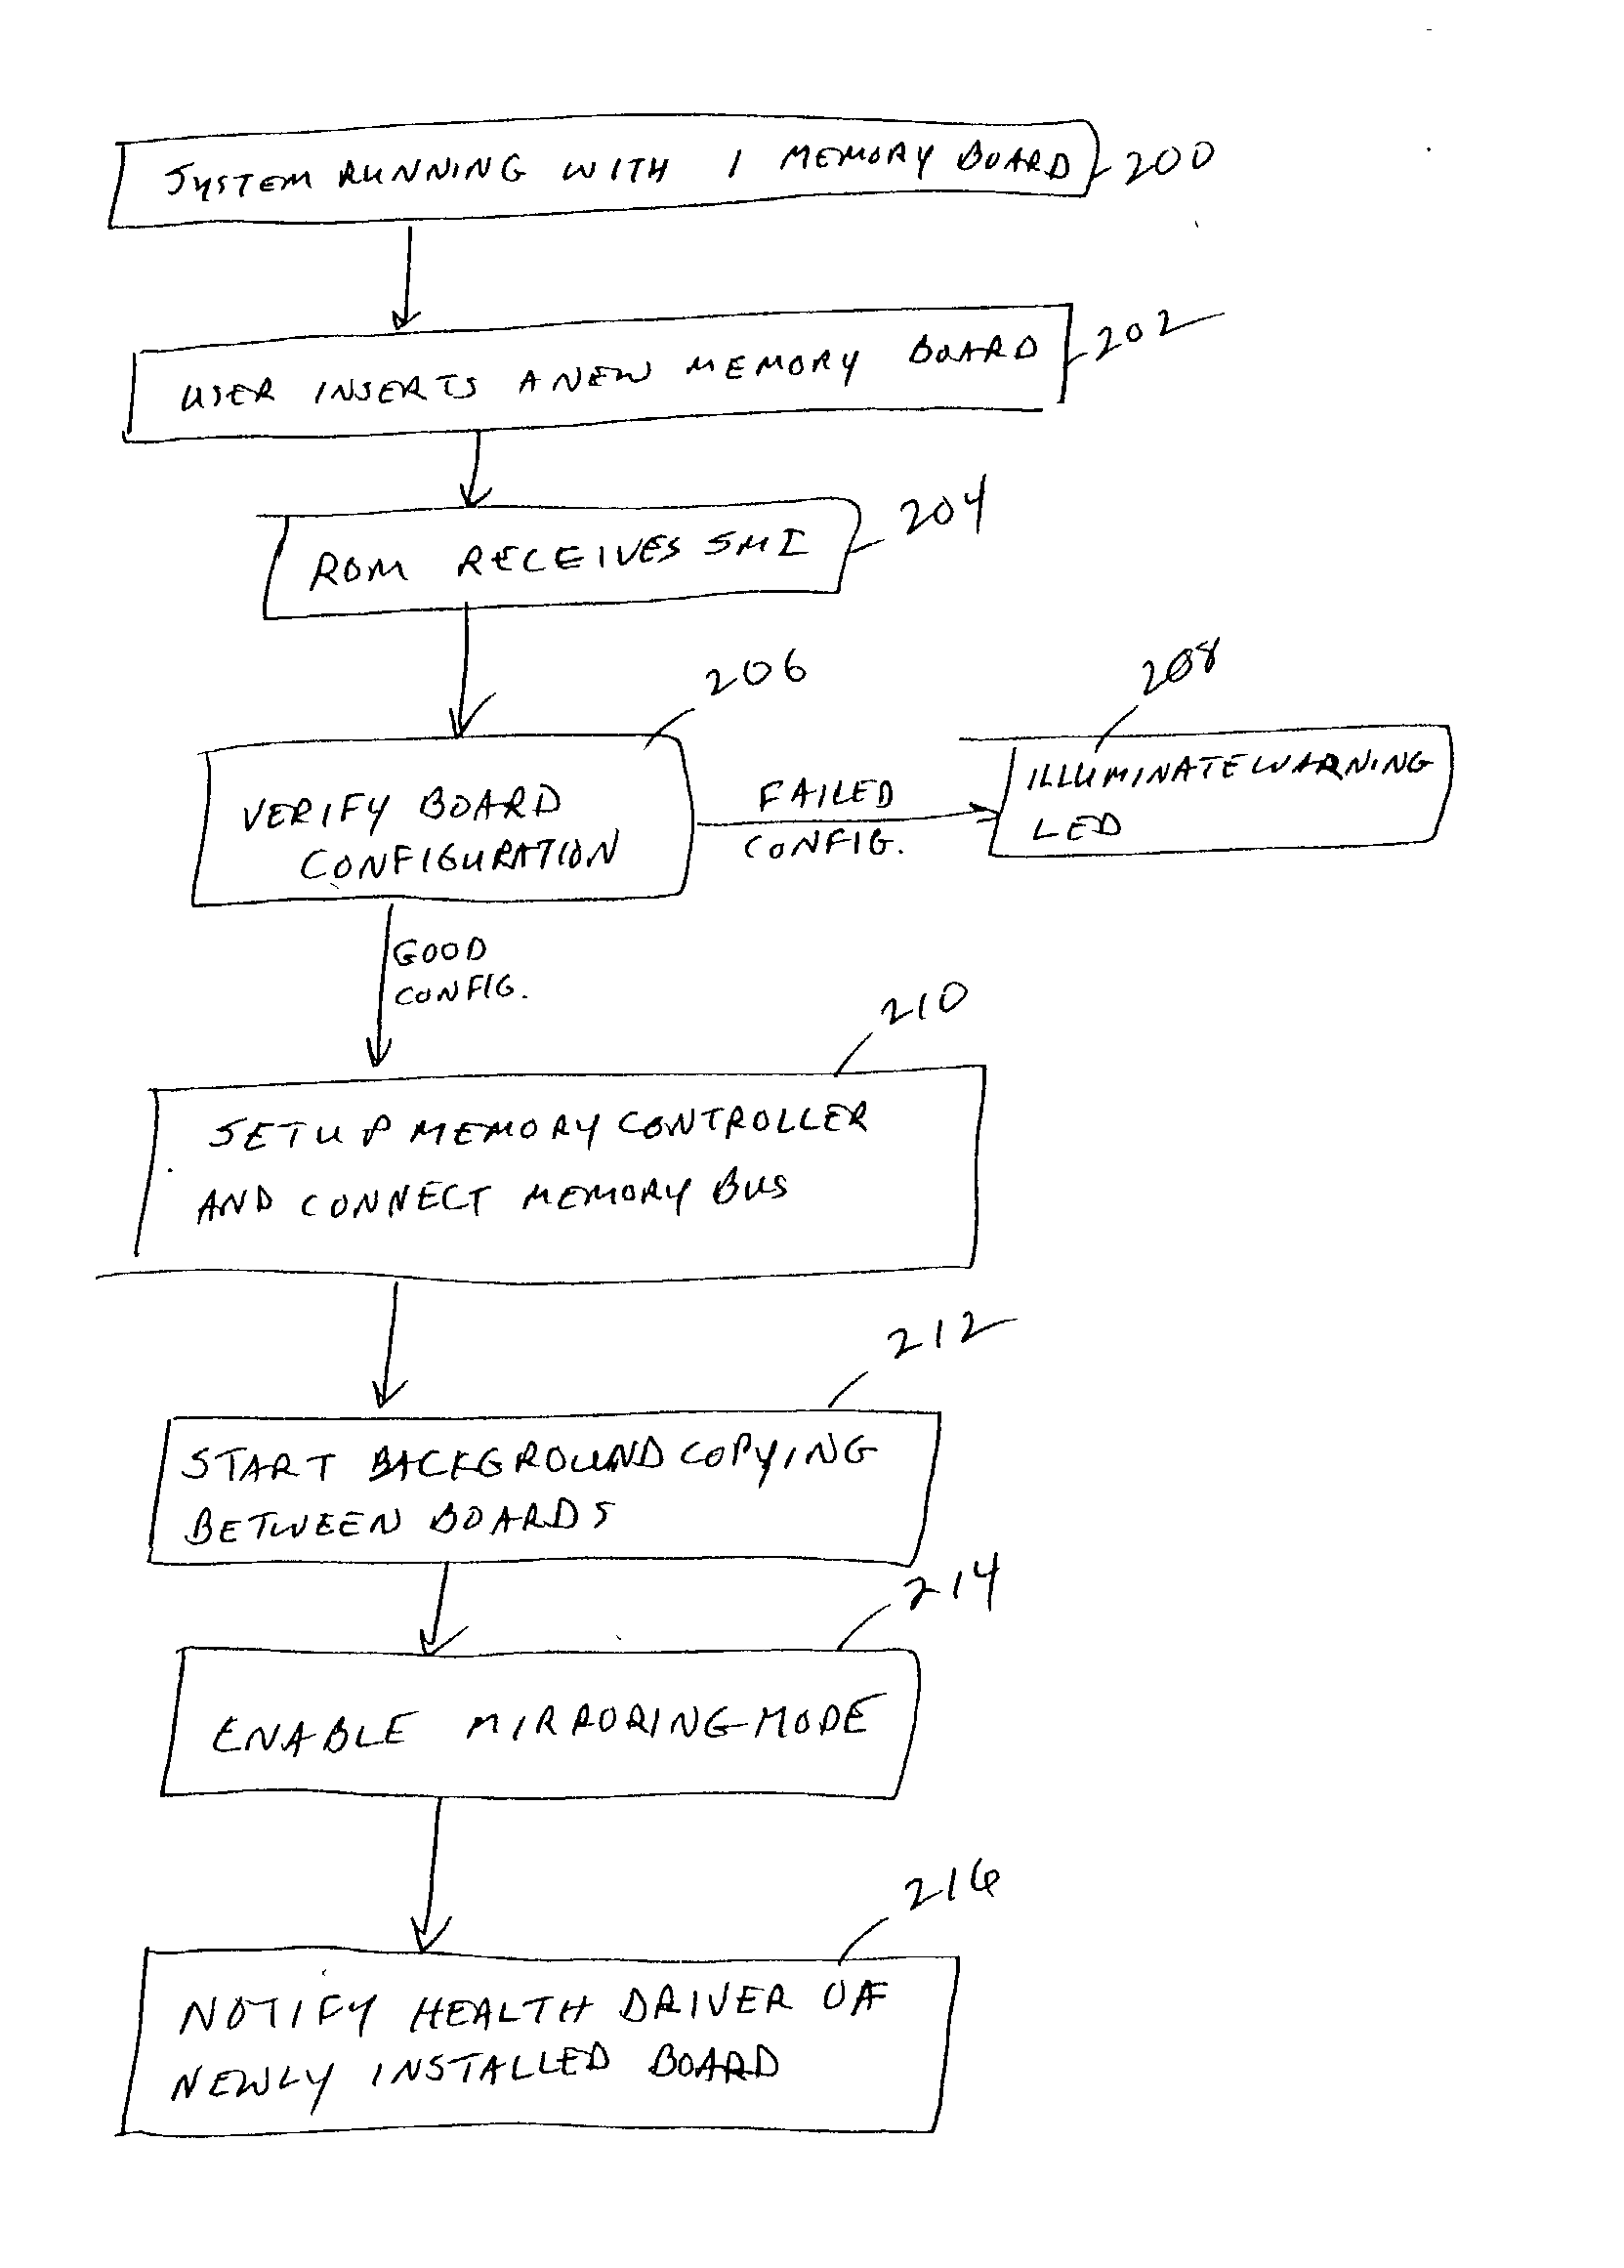 Hot mirroring in a computer system with redundant memory subsystems